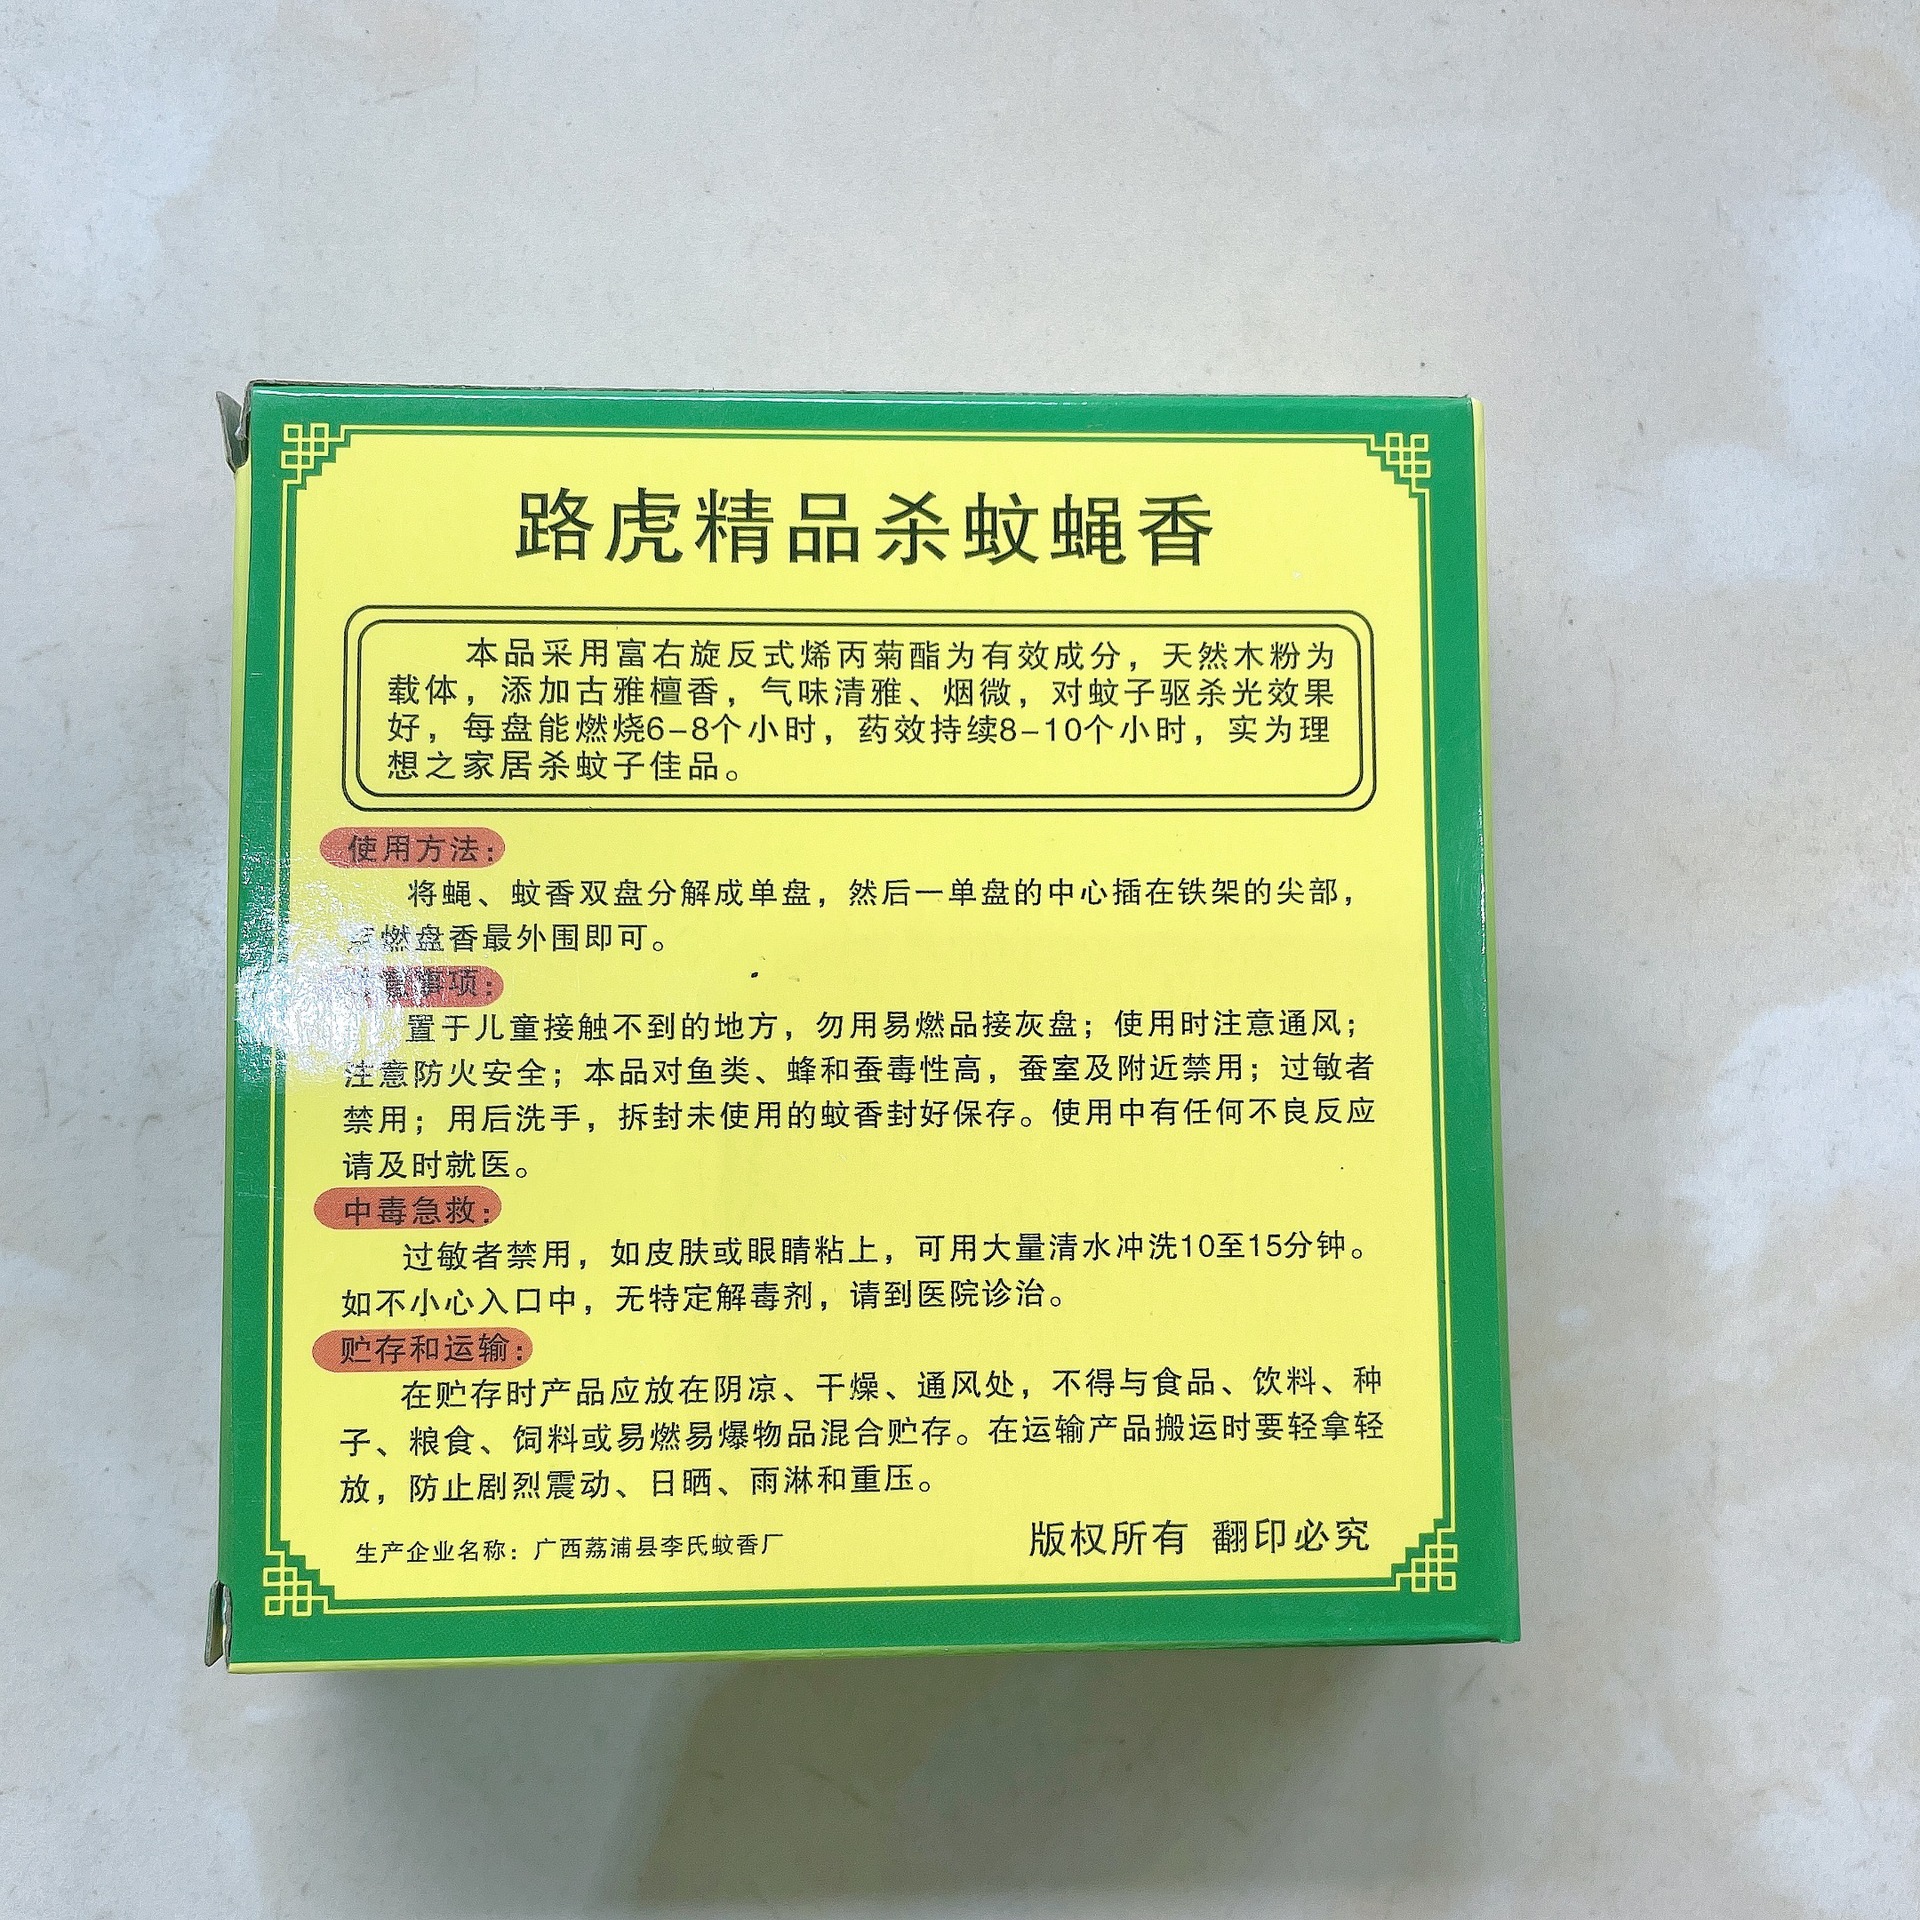 [Spot] Guo's Mount Elephant Factory Wild Land Rover Mosquito-Repellent Incense Stall Sandalwood Argy Wormwood Mosquito Repellent Mosquito-Repellent Incense King Killing Mosquito Flies